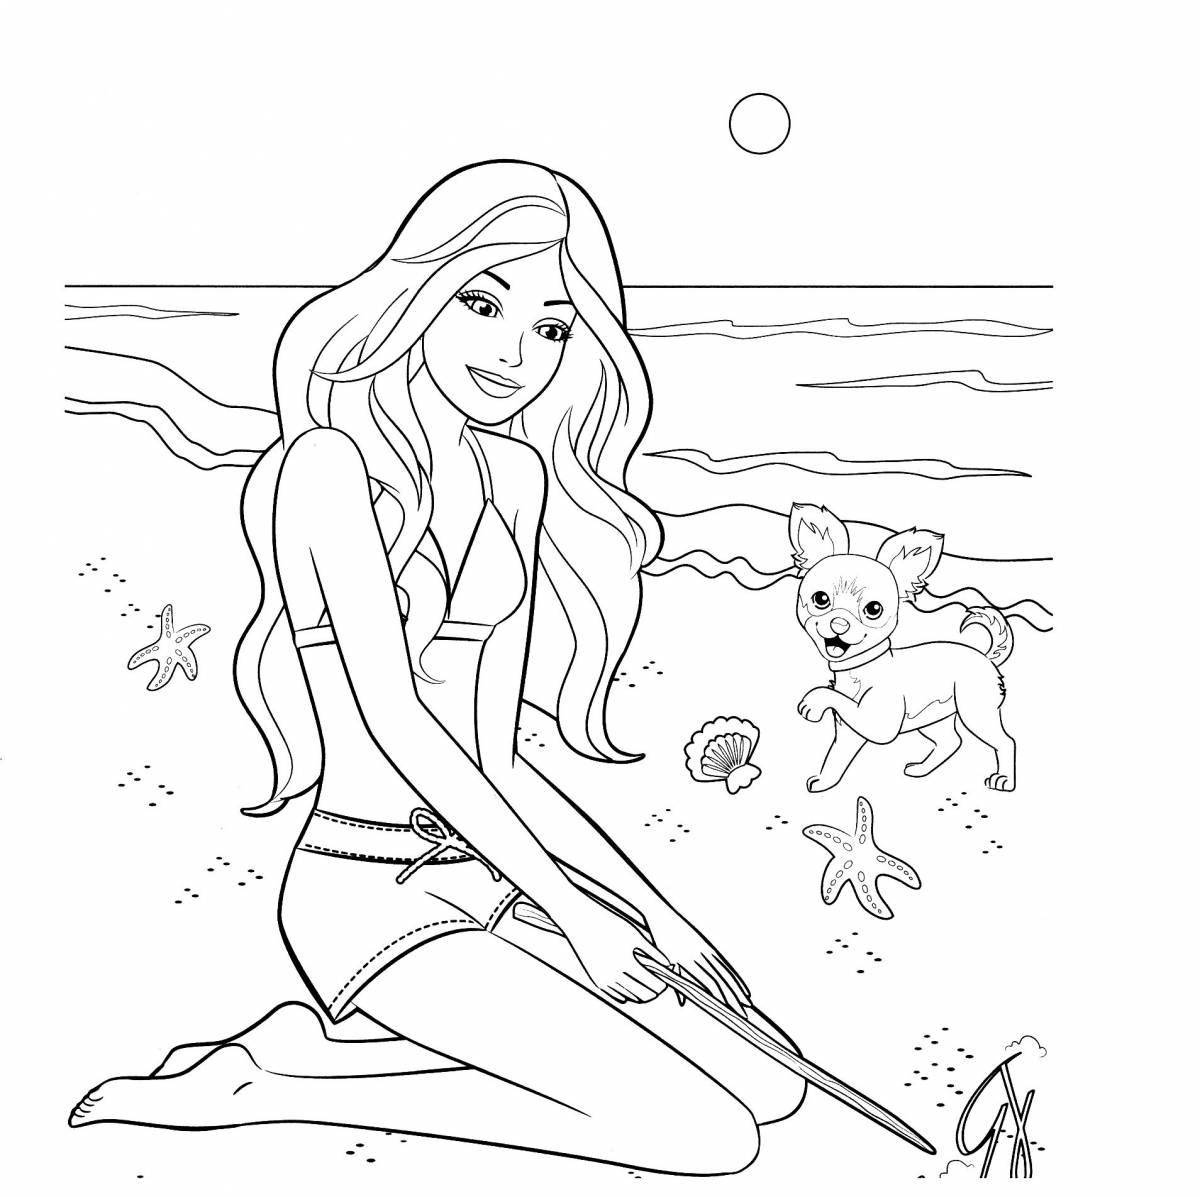 Fairytale coloring book Barbie with a dog